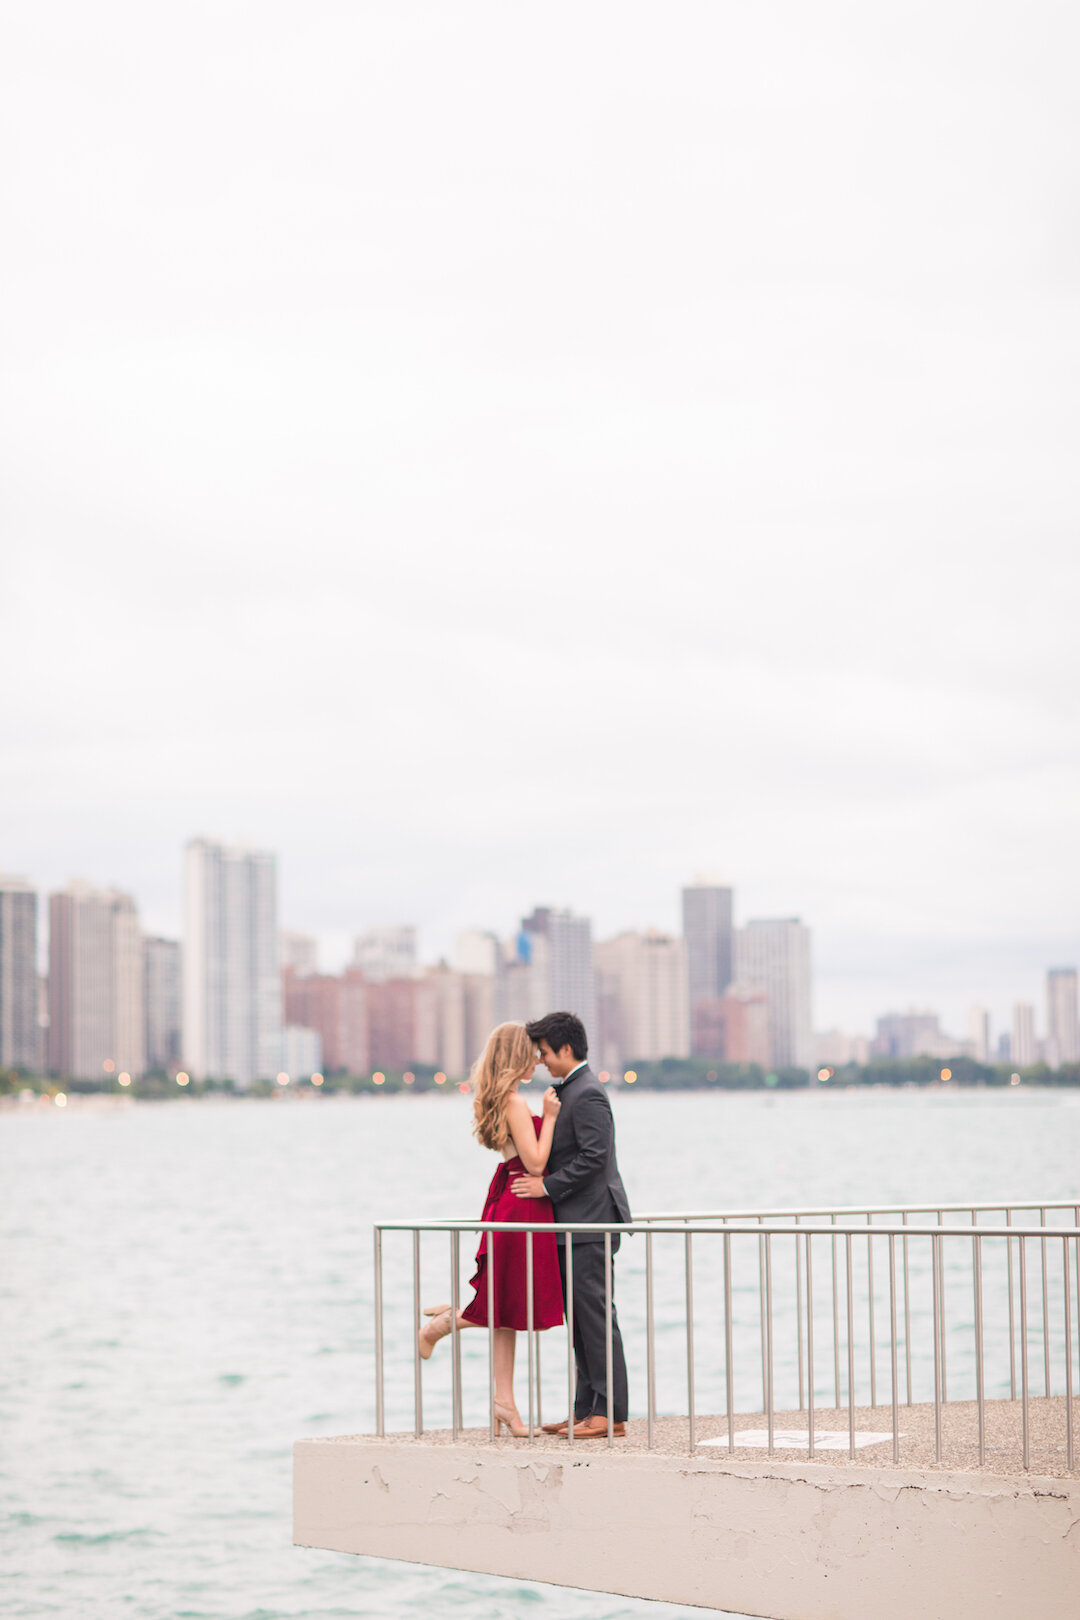 Dreamy Chicago Engagement Session captured by Ashley Johnson Photography. See more Chicago engagement photo ideas at CHItheeWED.com!